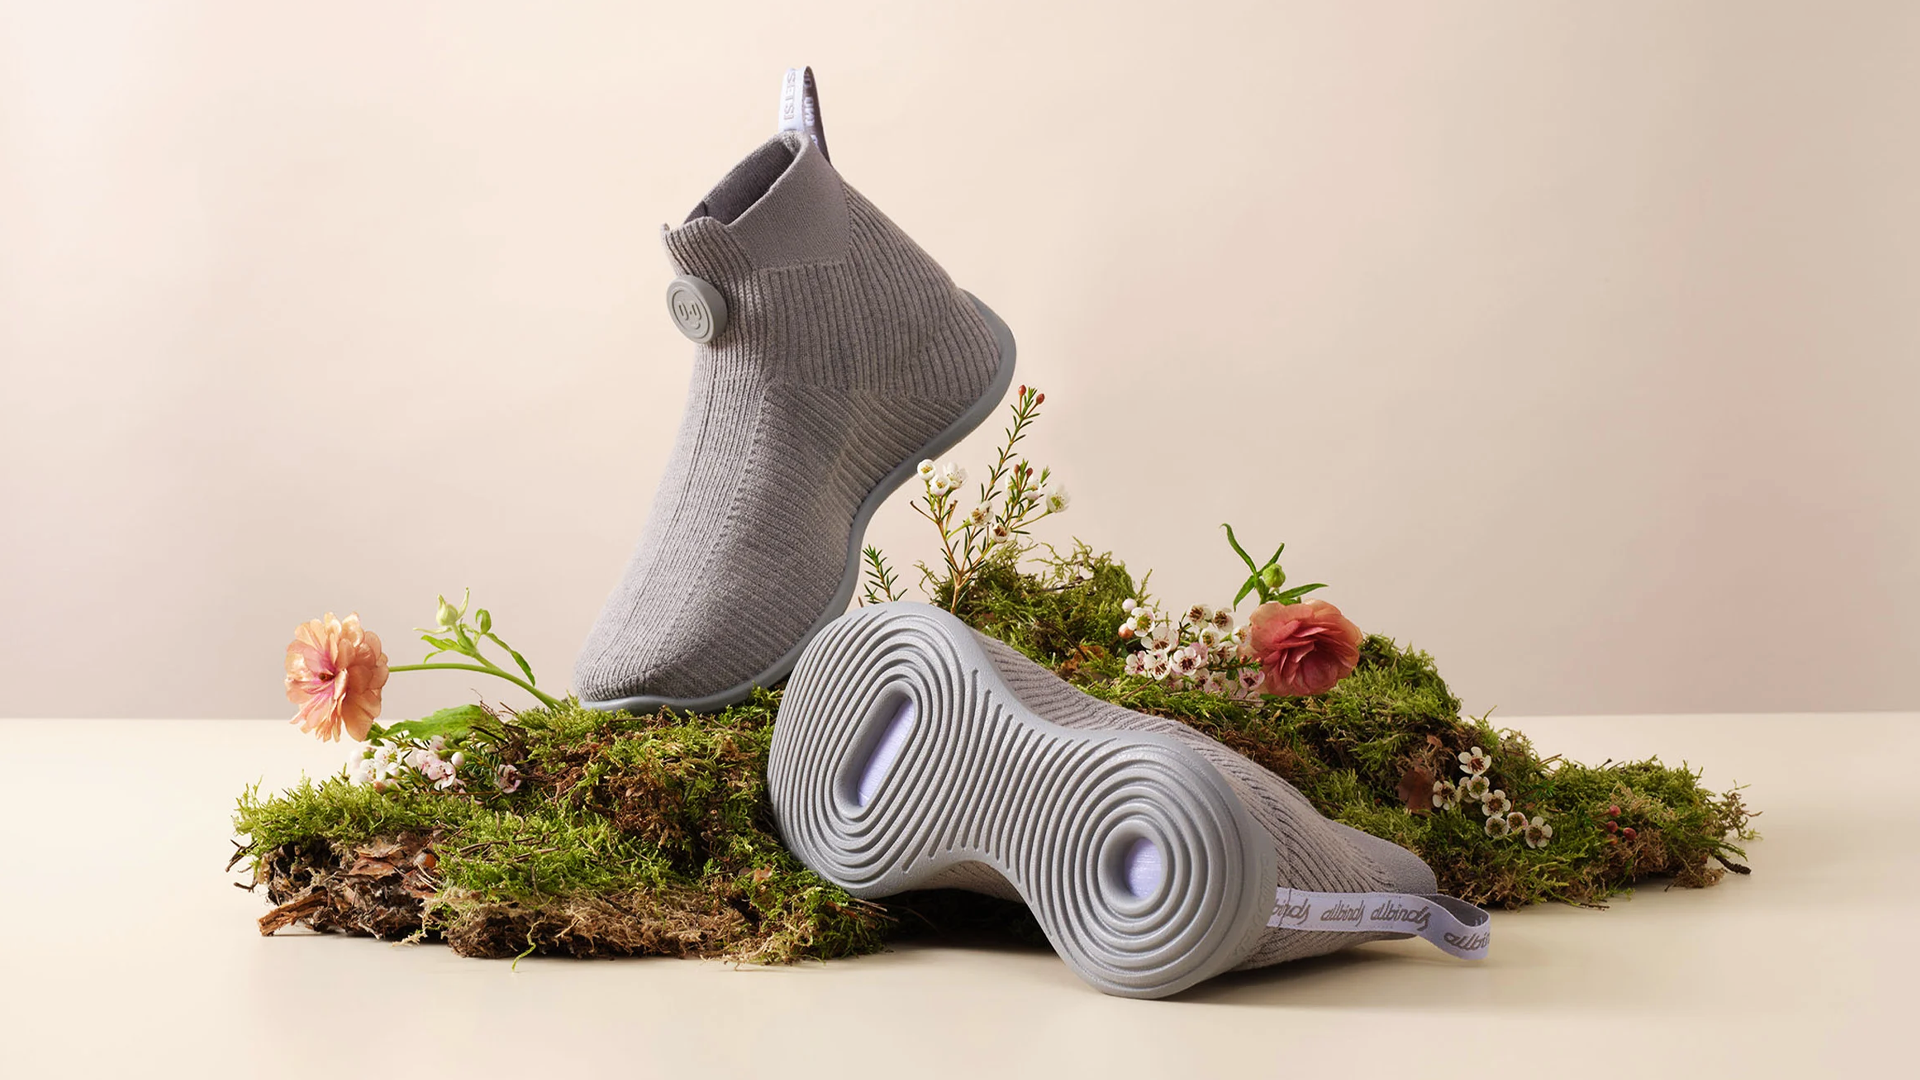 This is the ‘world’s first net-zero carbon shoe’ says Allbirds